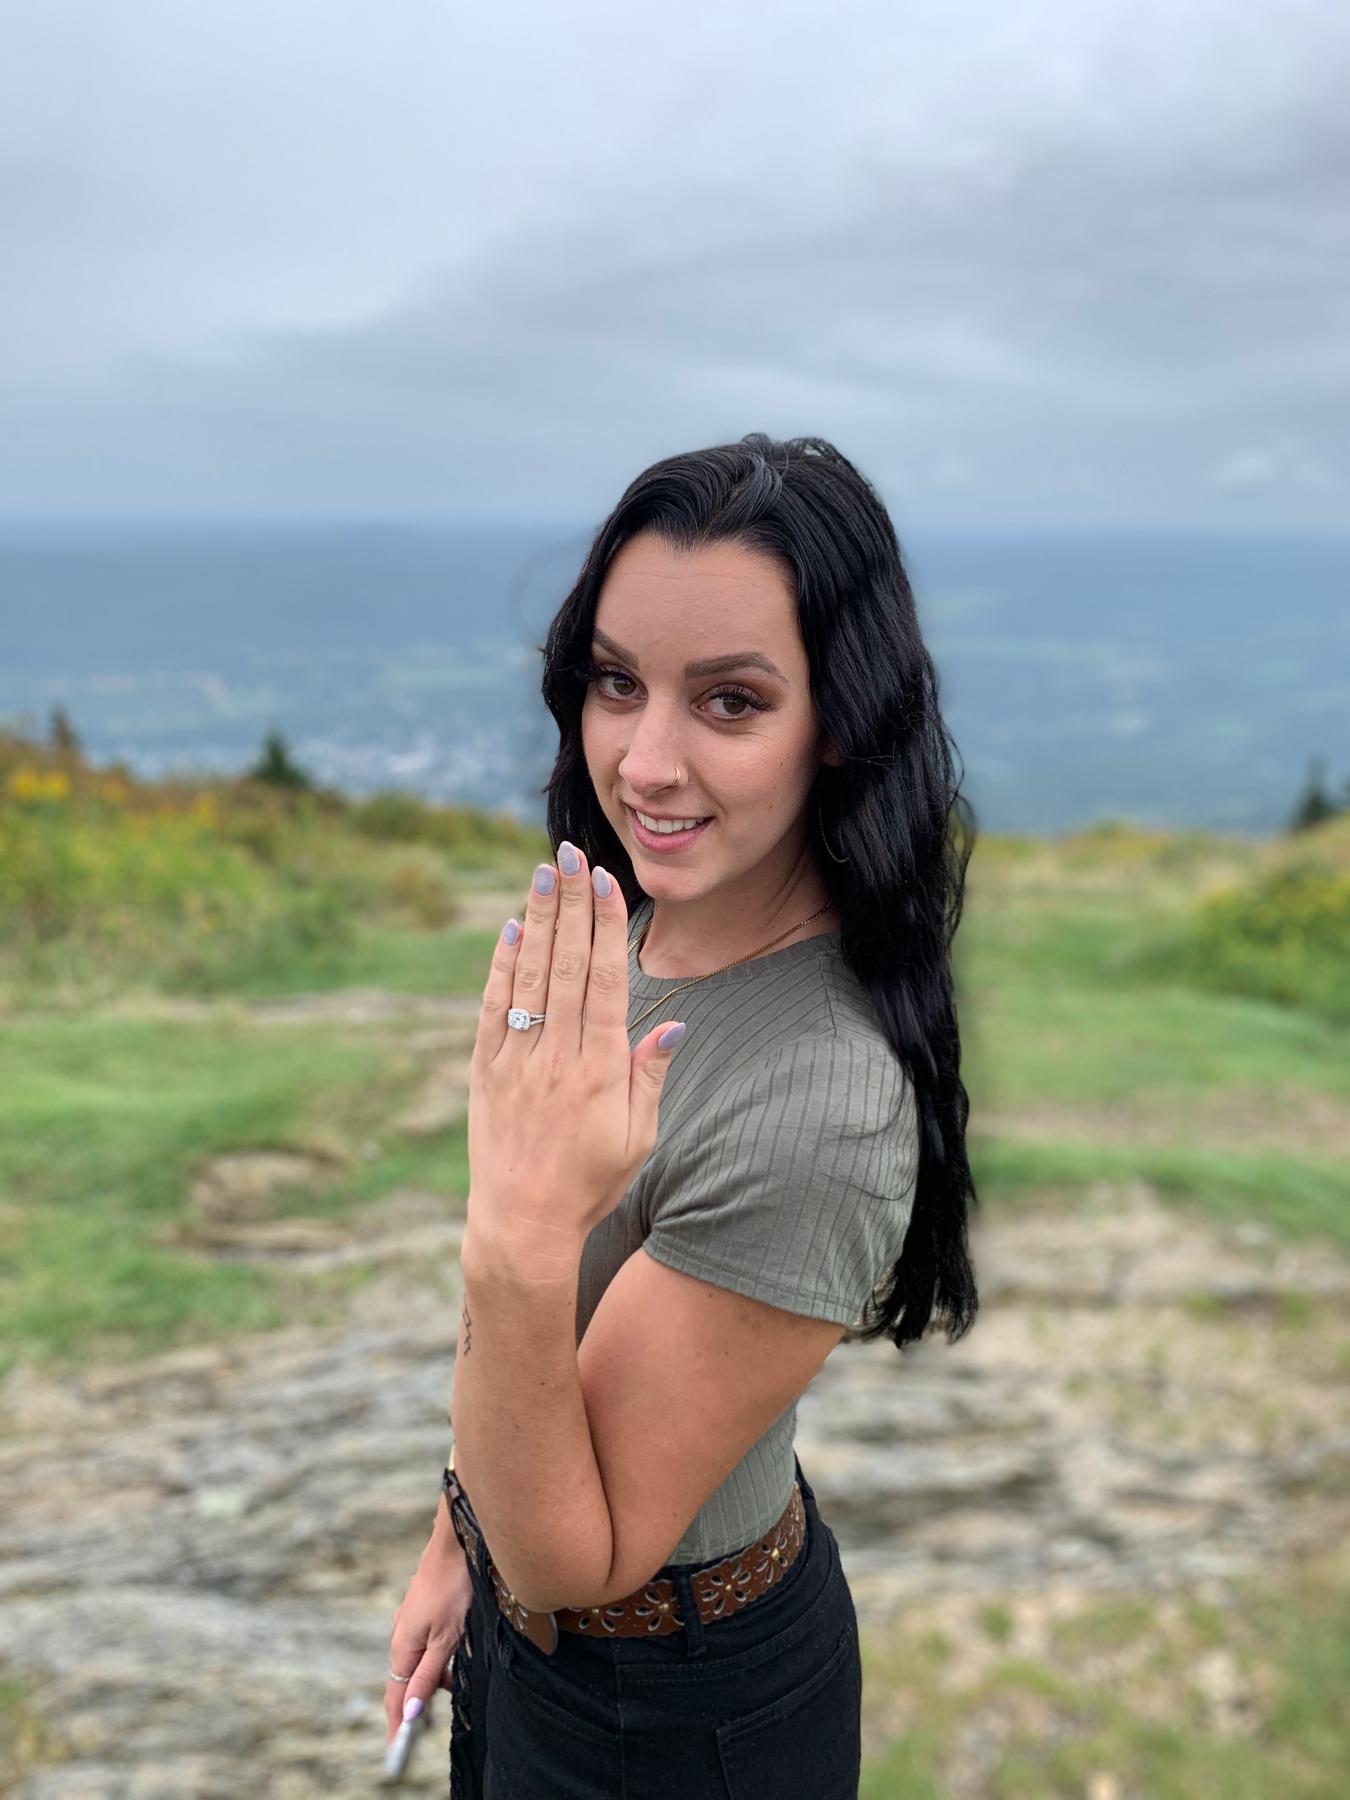 She said YES in 2022 💍